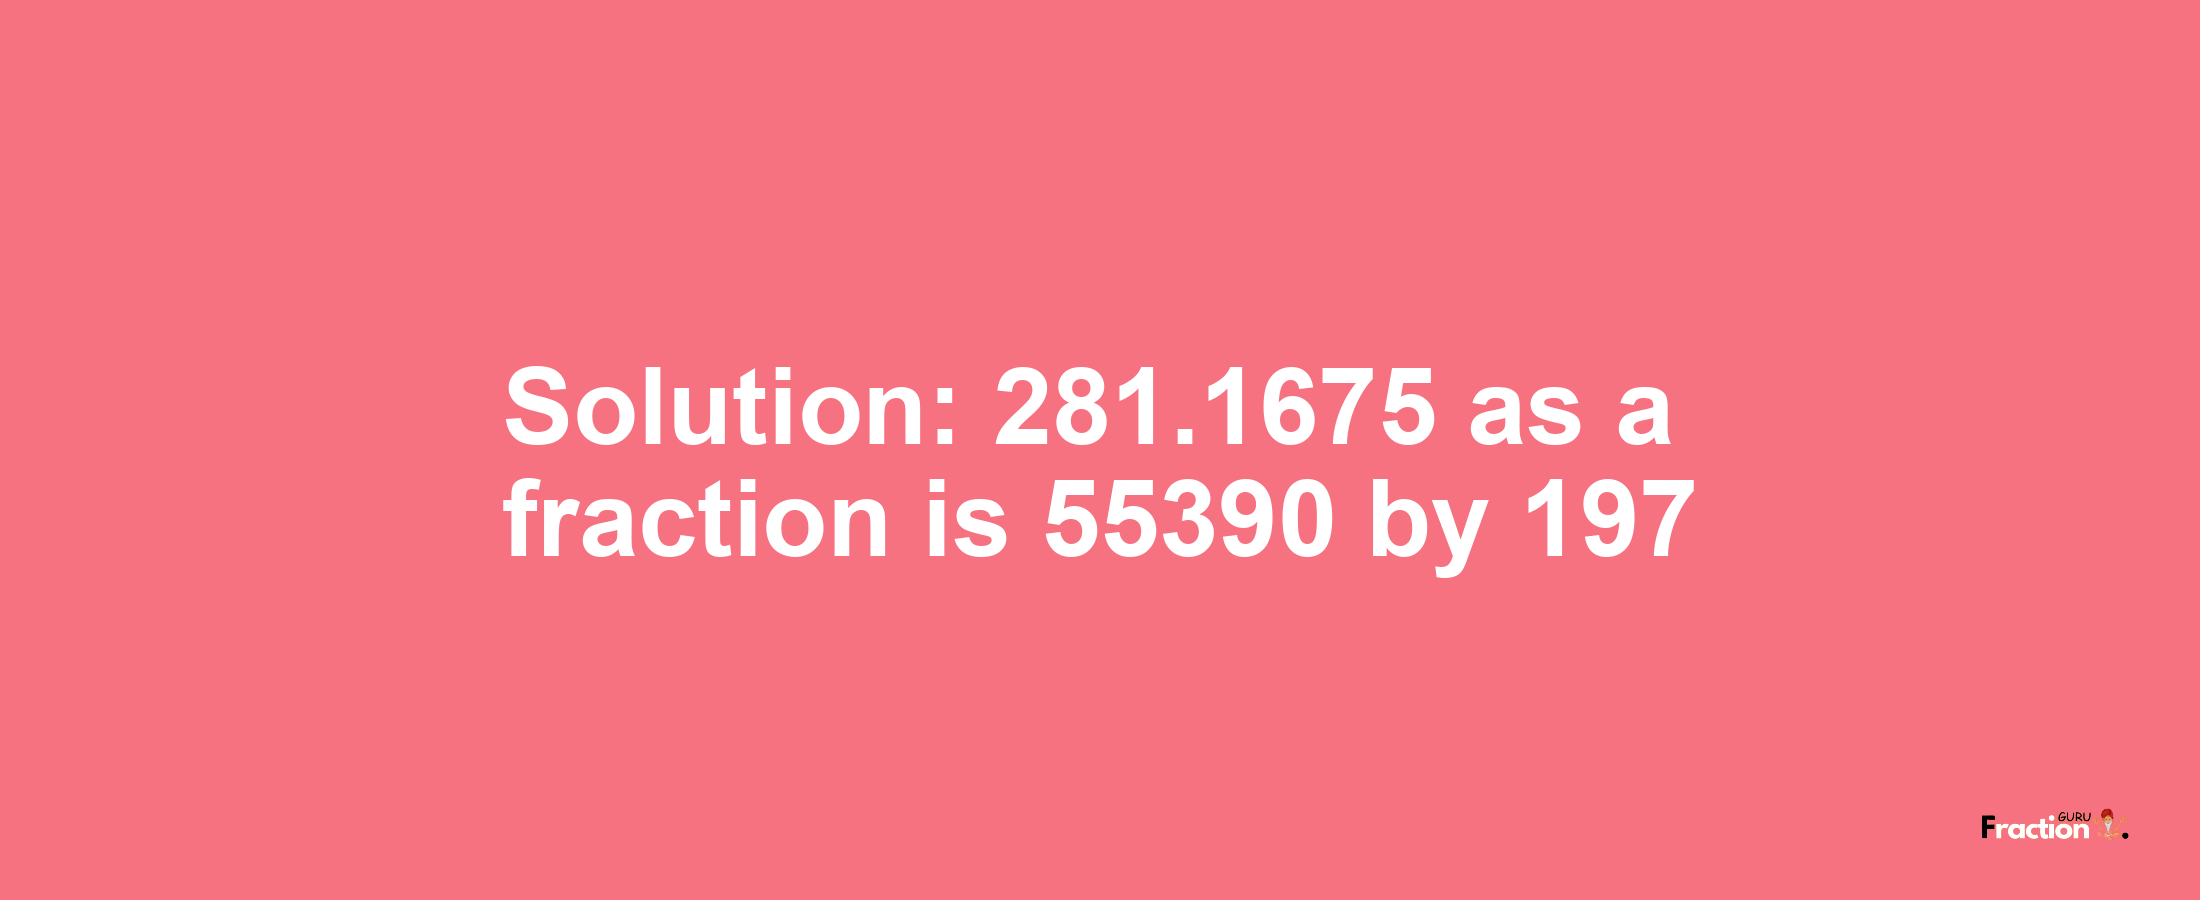 Solution:281.1675 as a fraction is 55390/197